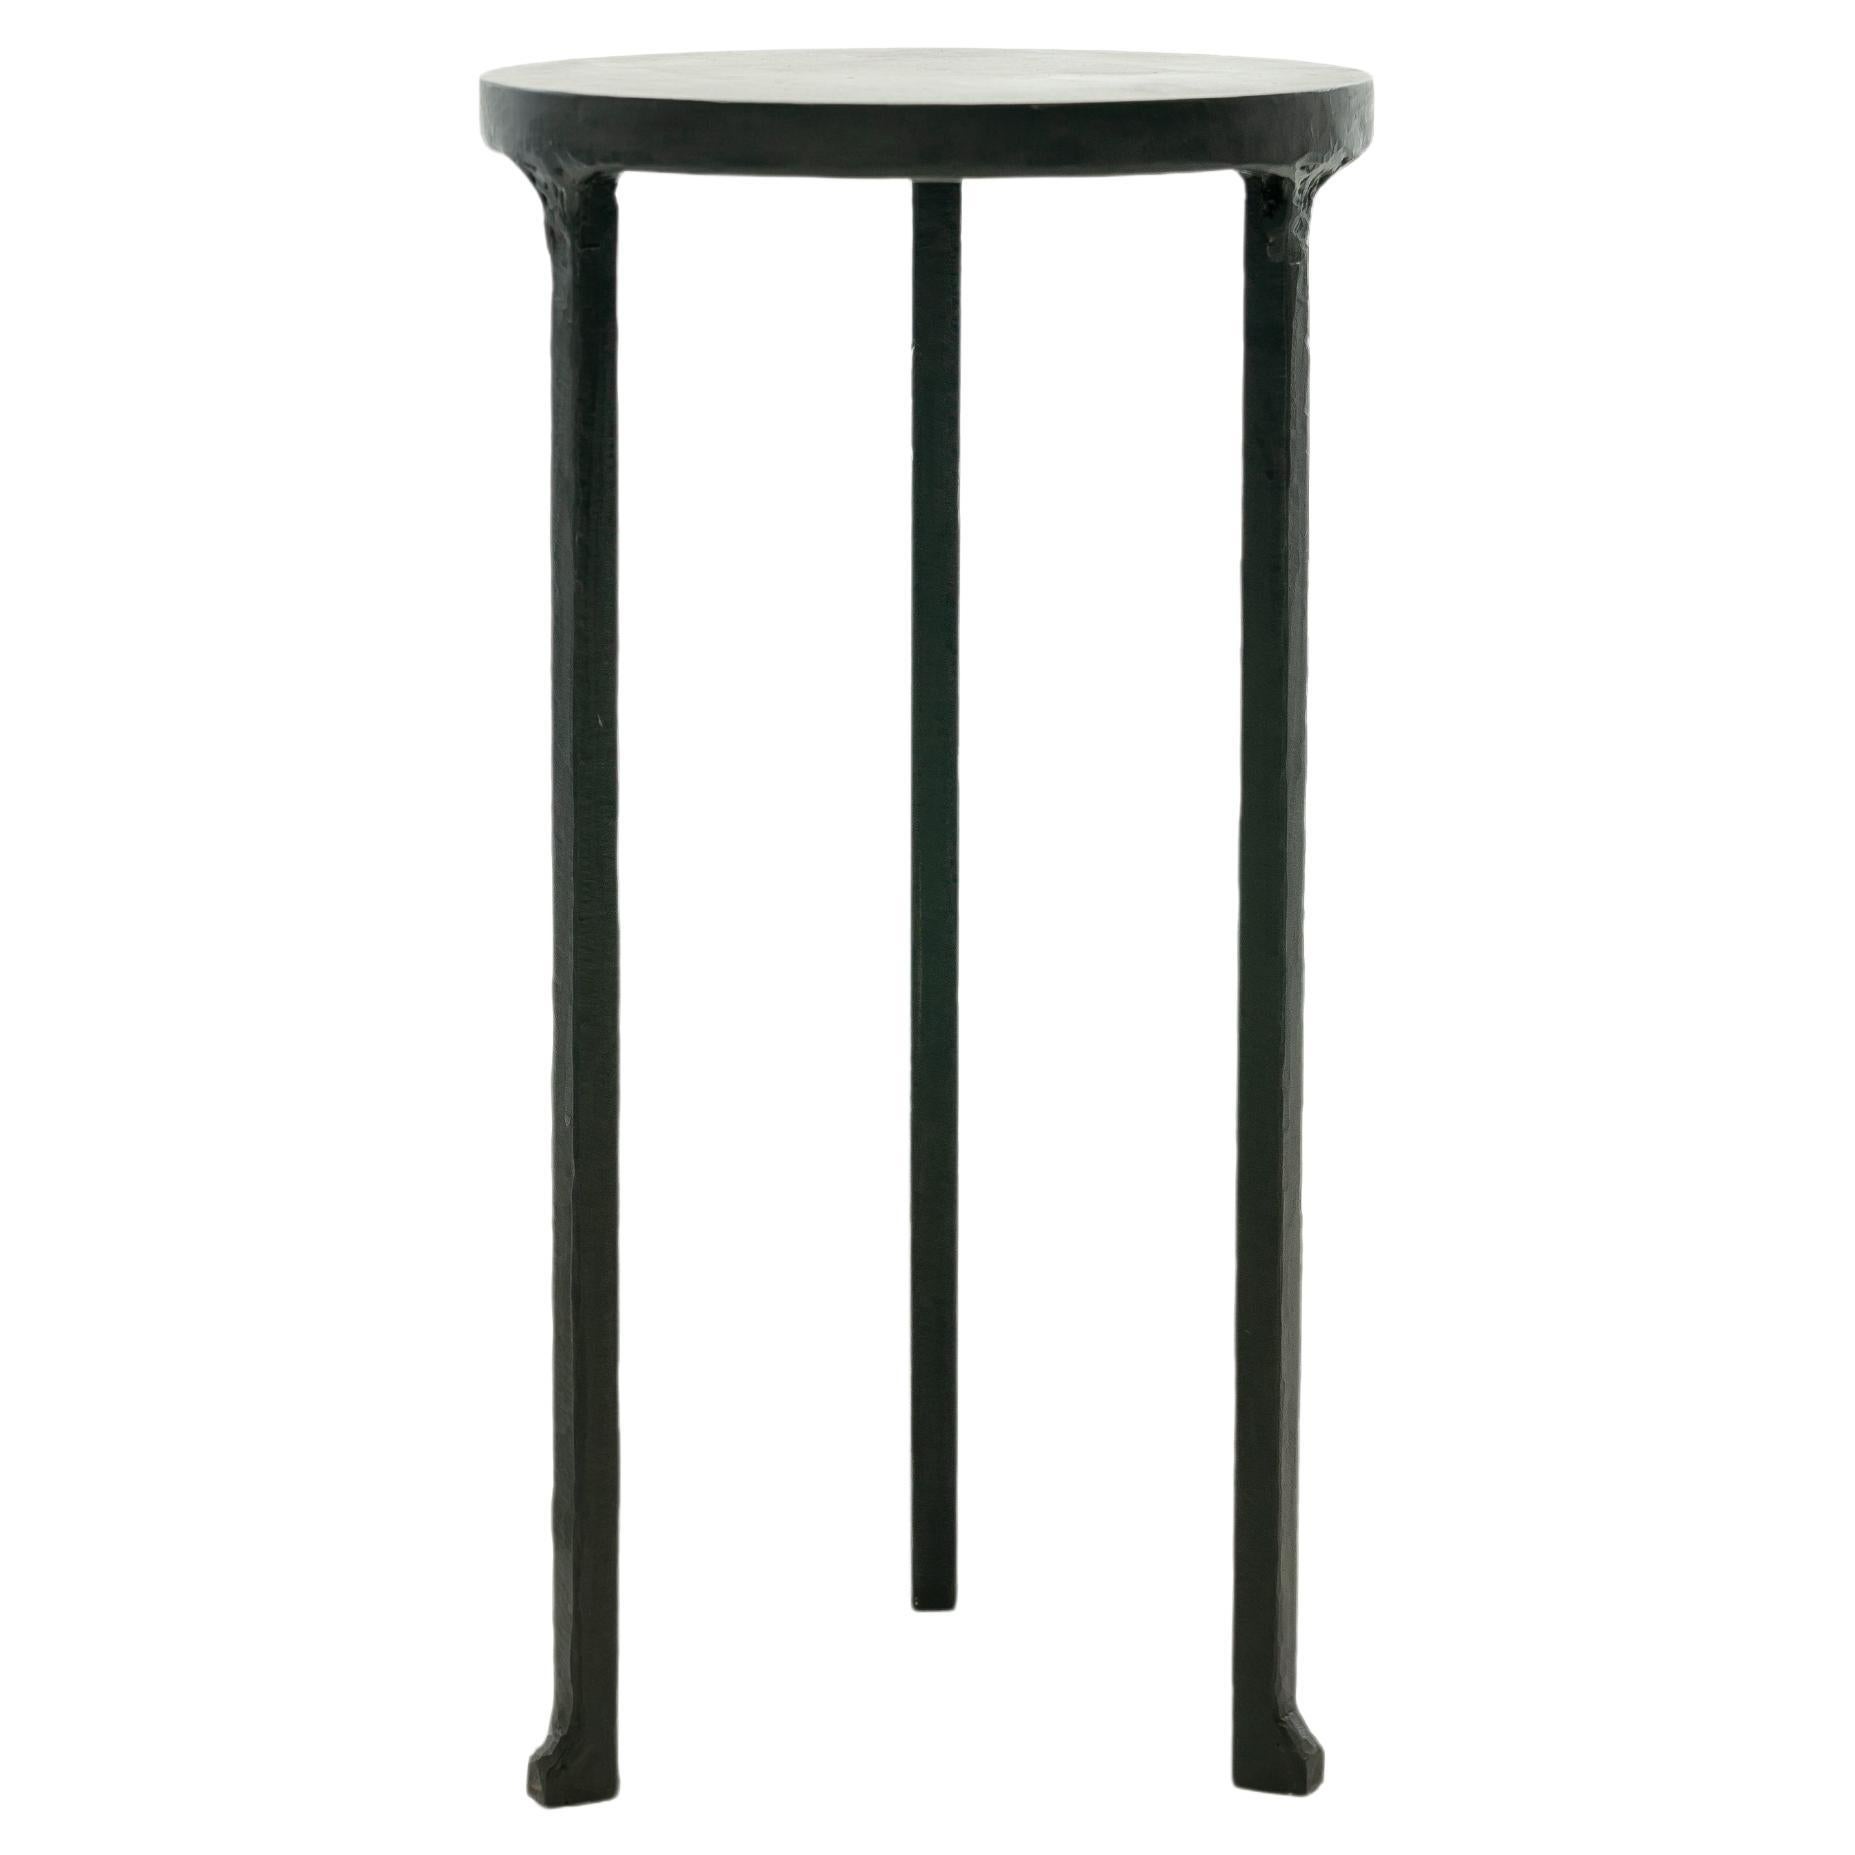 Cocktail Table Modern Hand-Shaped Round Handmade Blackened and Waxed Steel